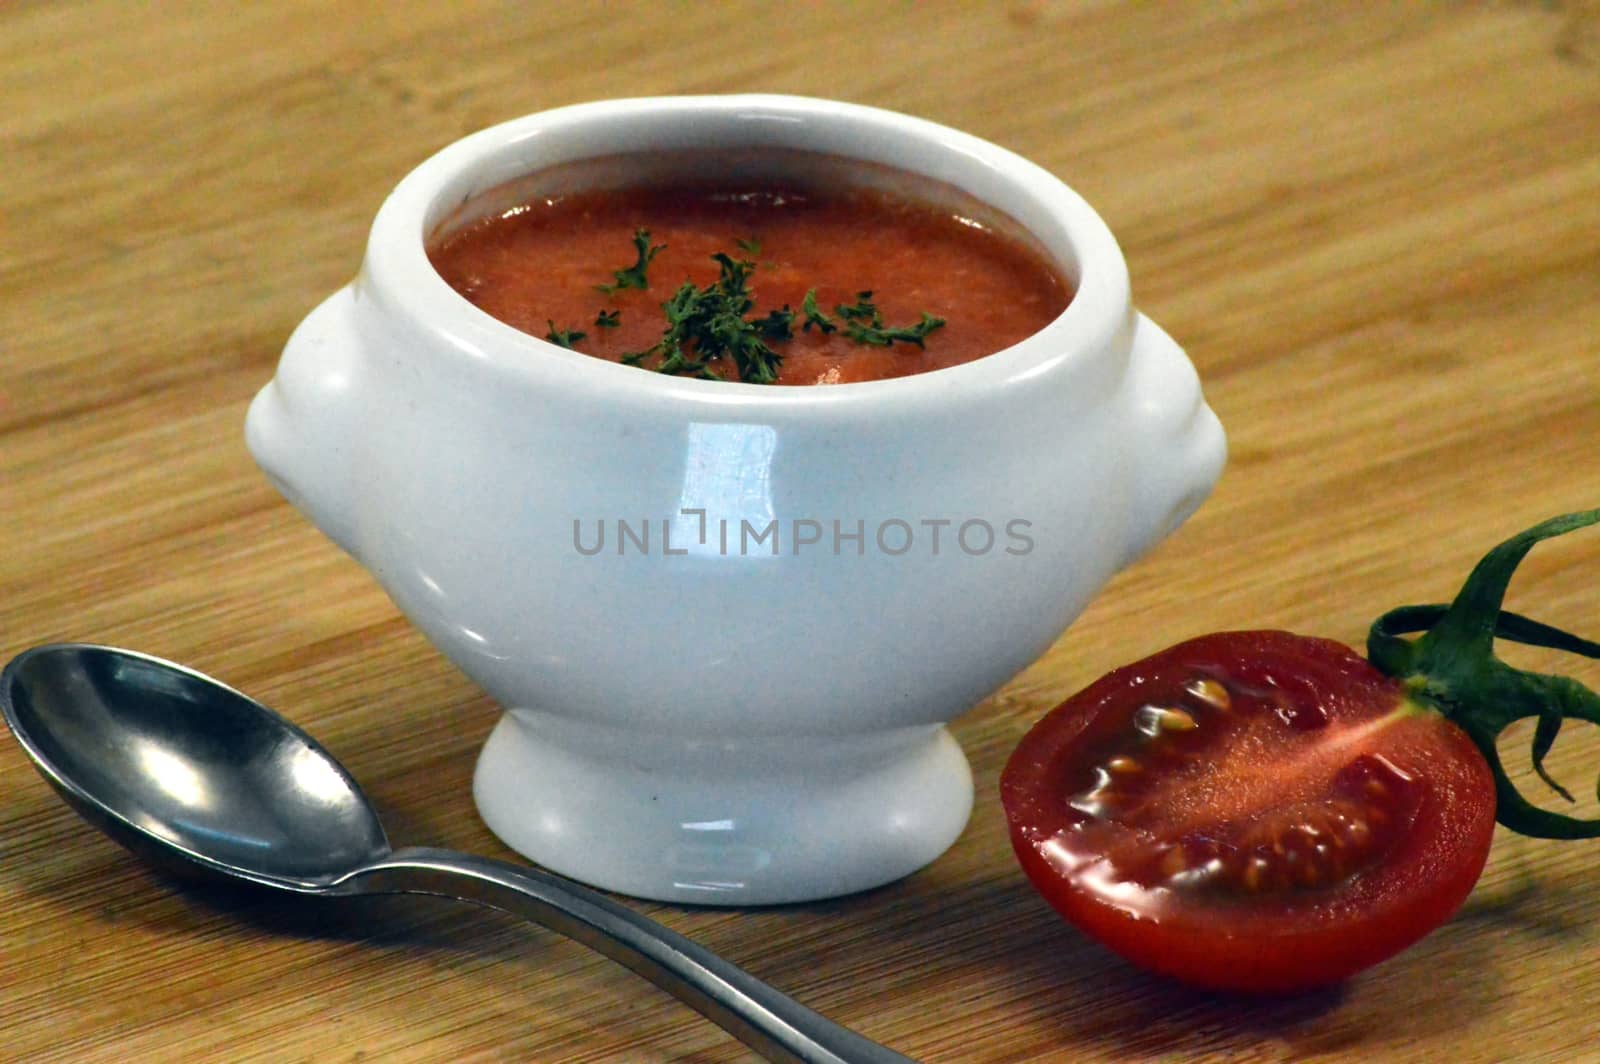 Cream of tomato soup in a white bowl by Philou1000